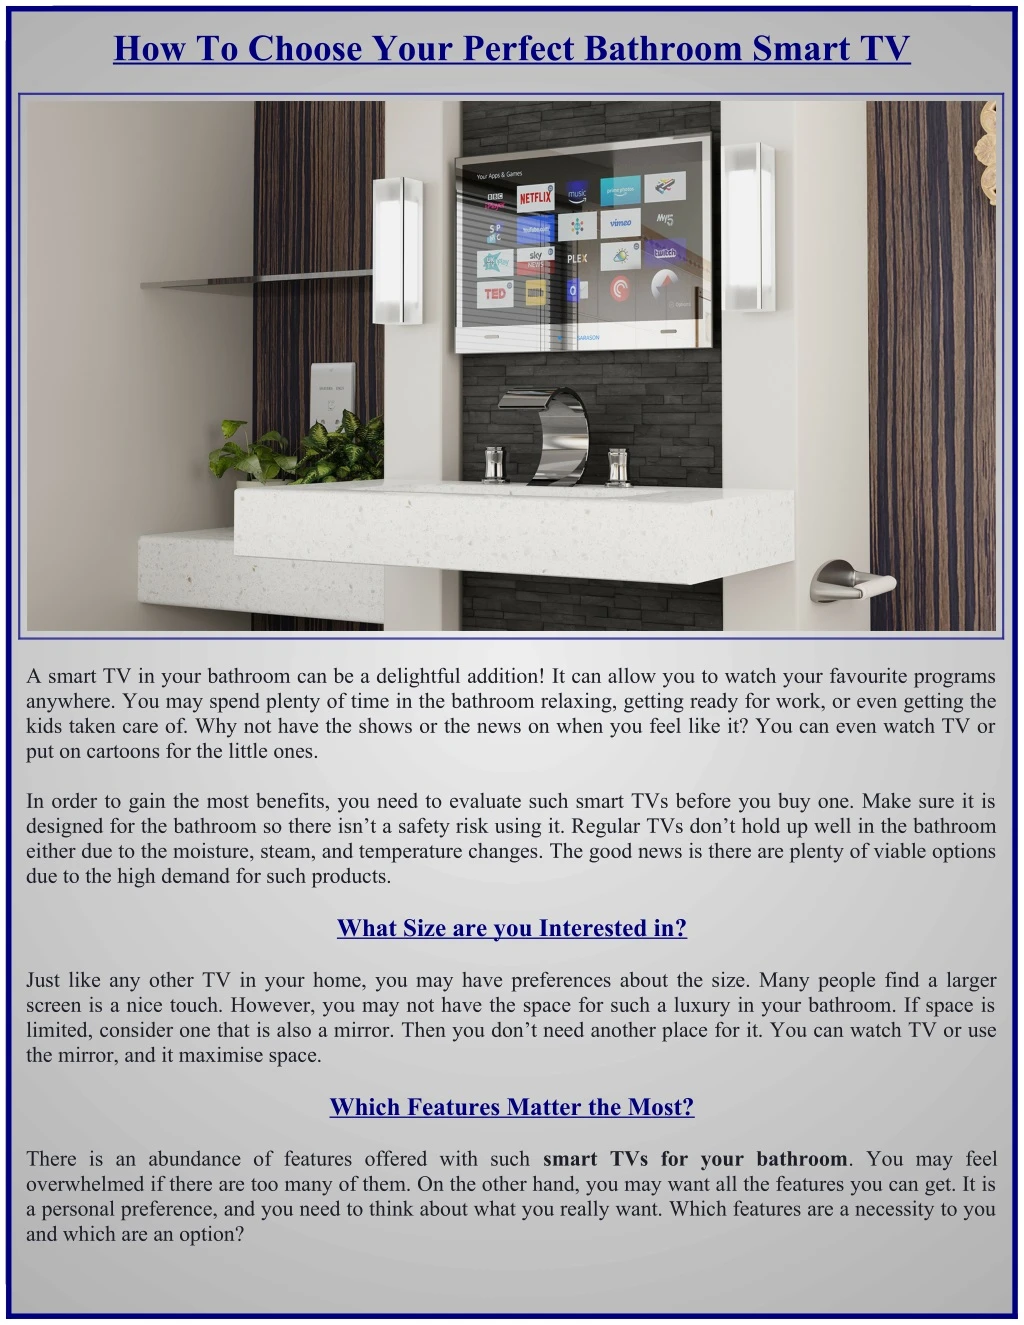 how to choose your perfect bathroom smart tv